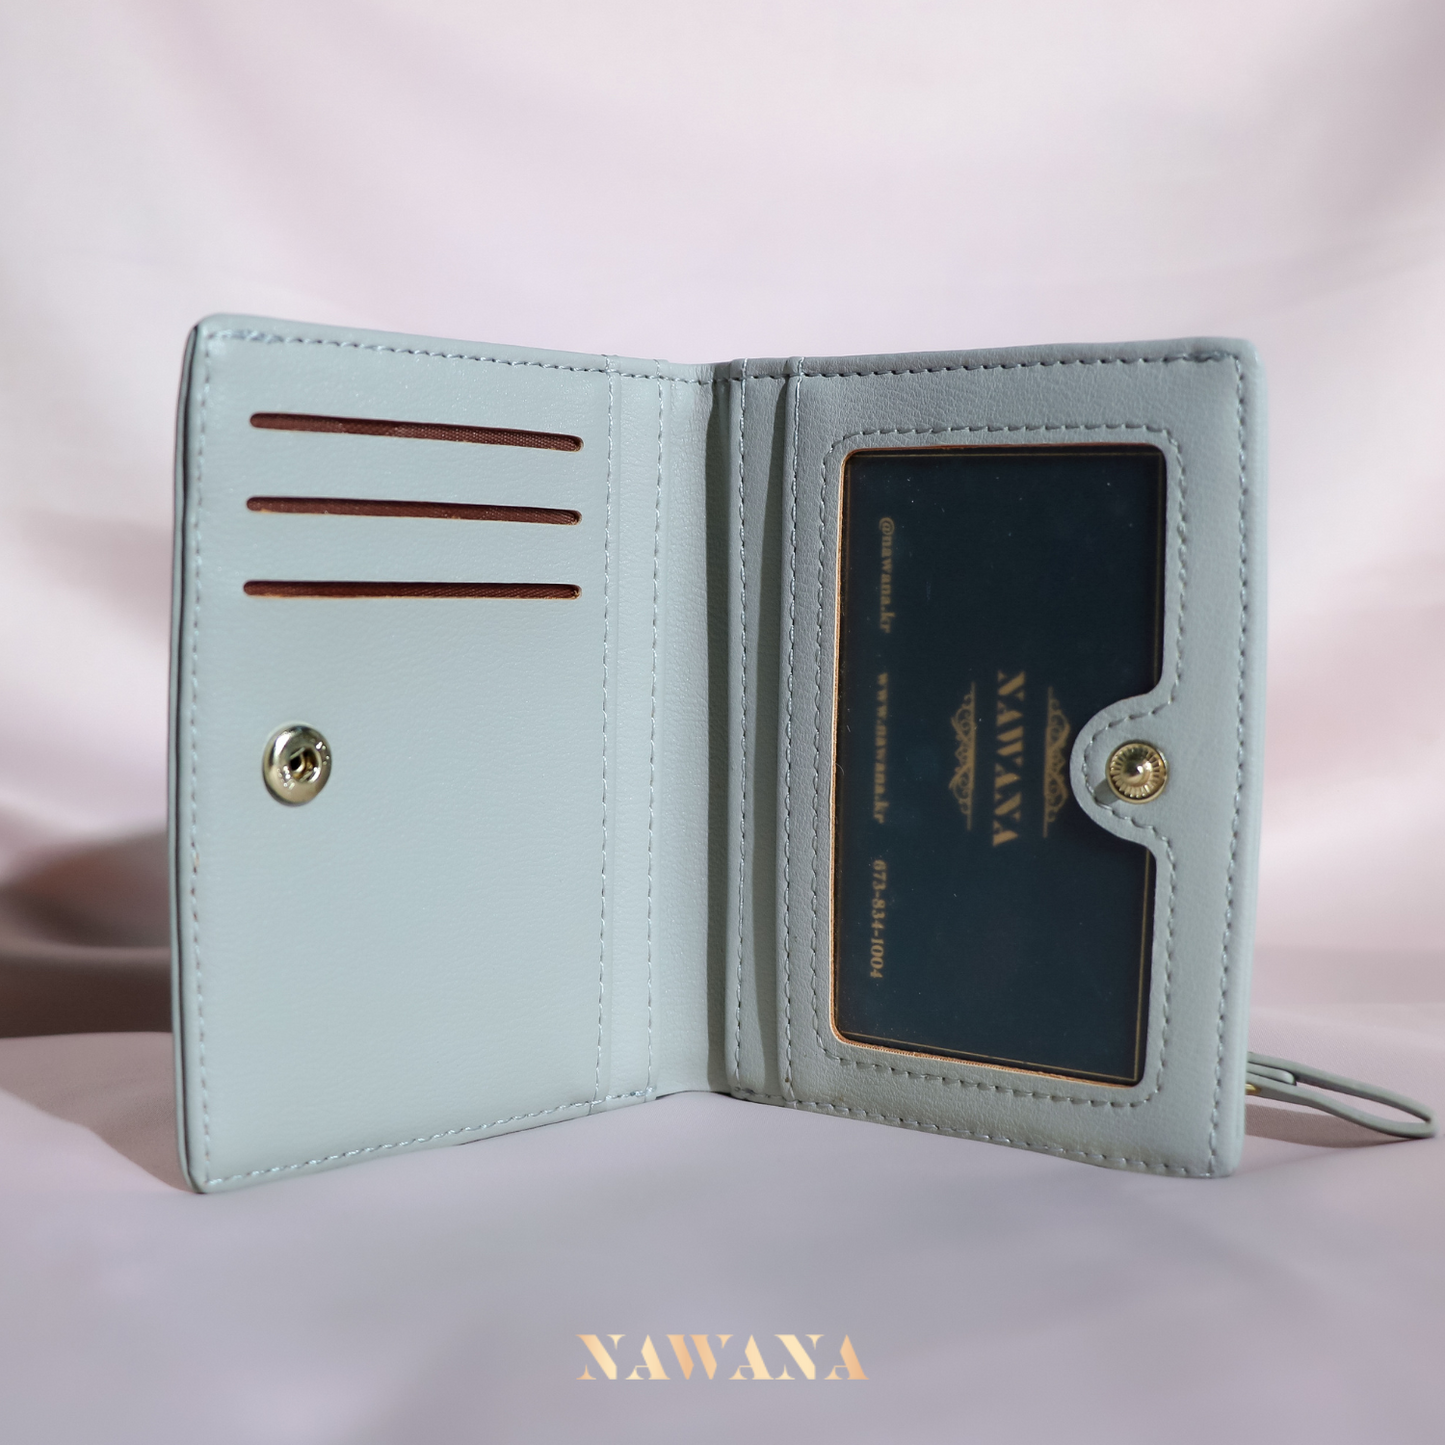 Forever Young Wallets (포레파 요웅)